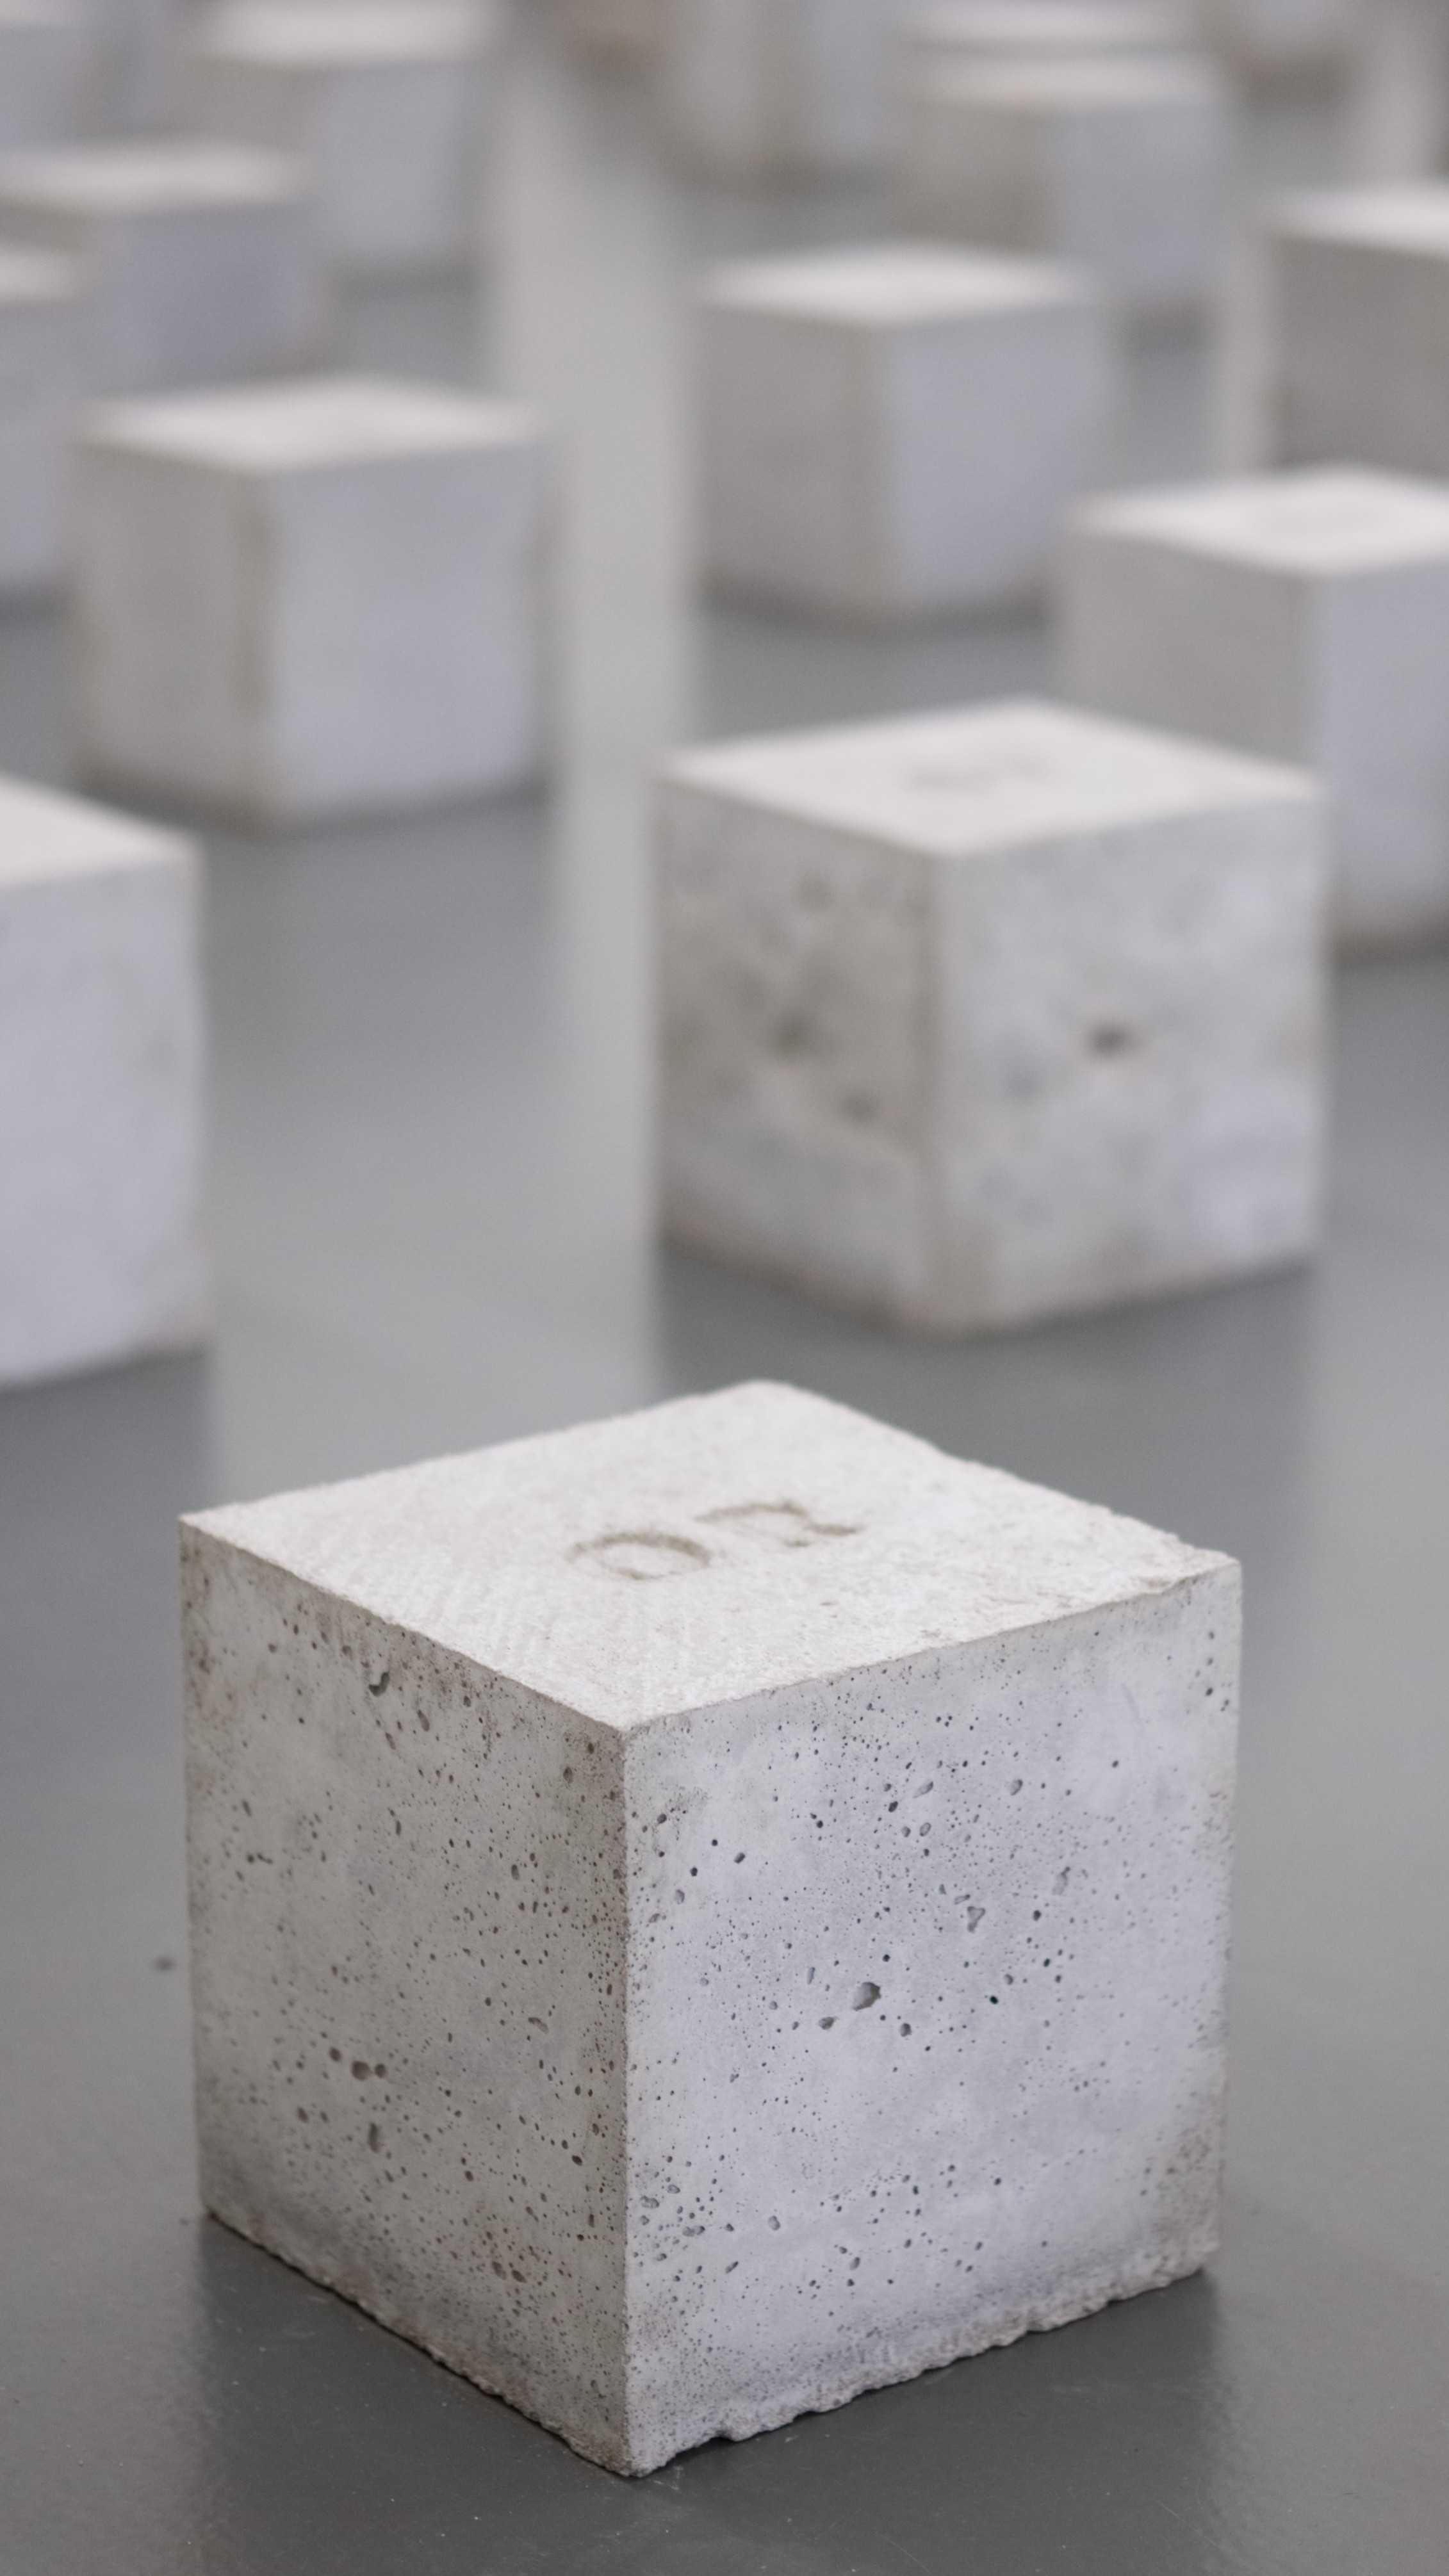 A picture of multiple concrete cubes aligned in a grid